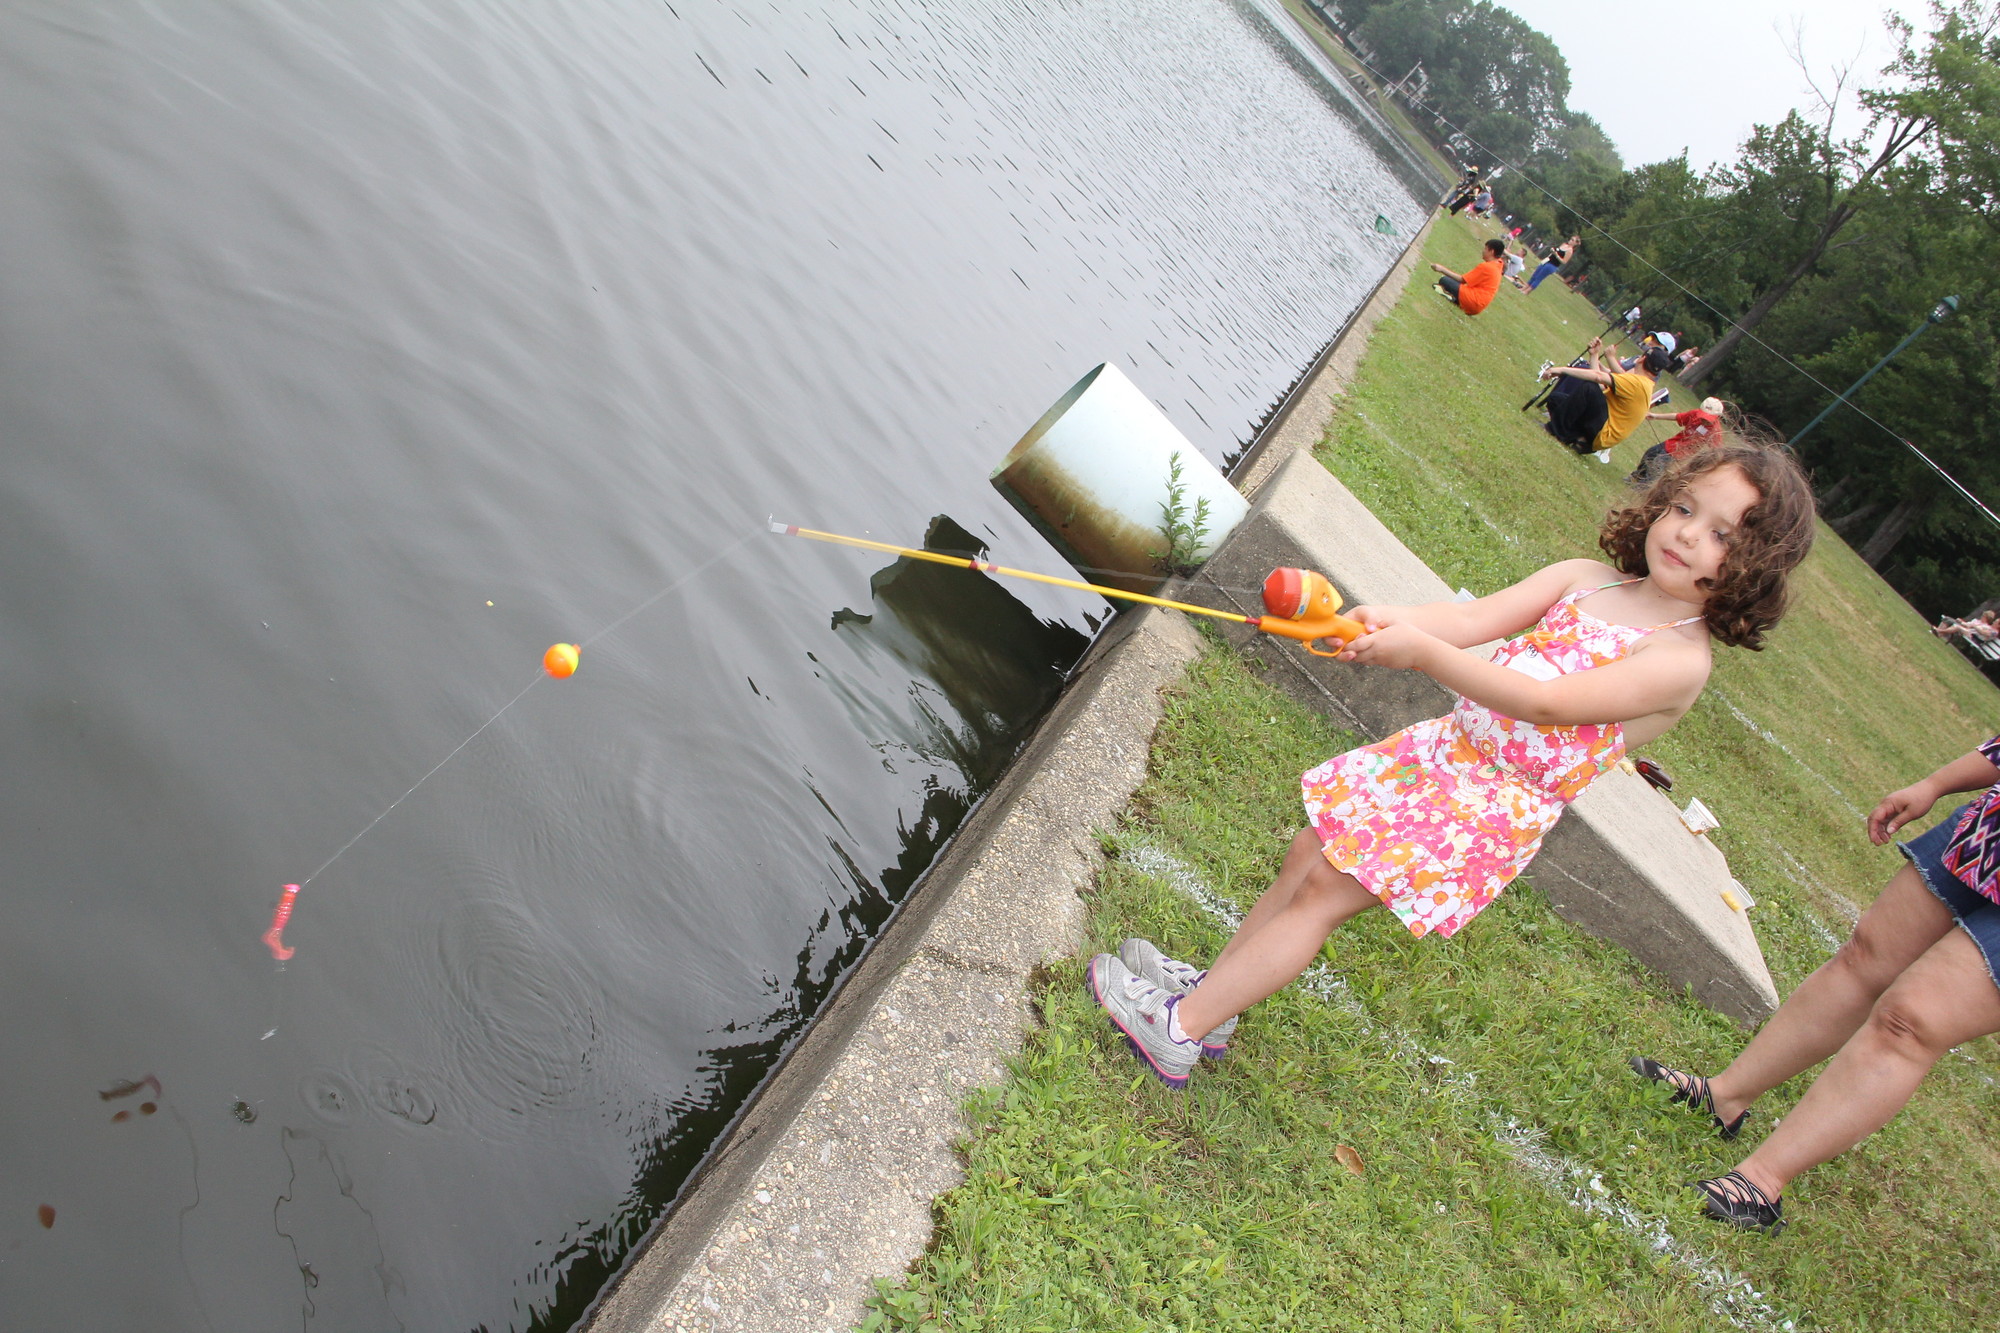 Charlotte Prial, 4, has a great time on her first fishing trip at Hendrickson Park last Sunday afternoon.